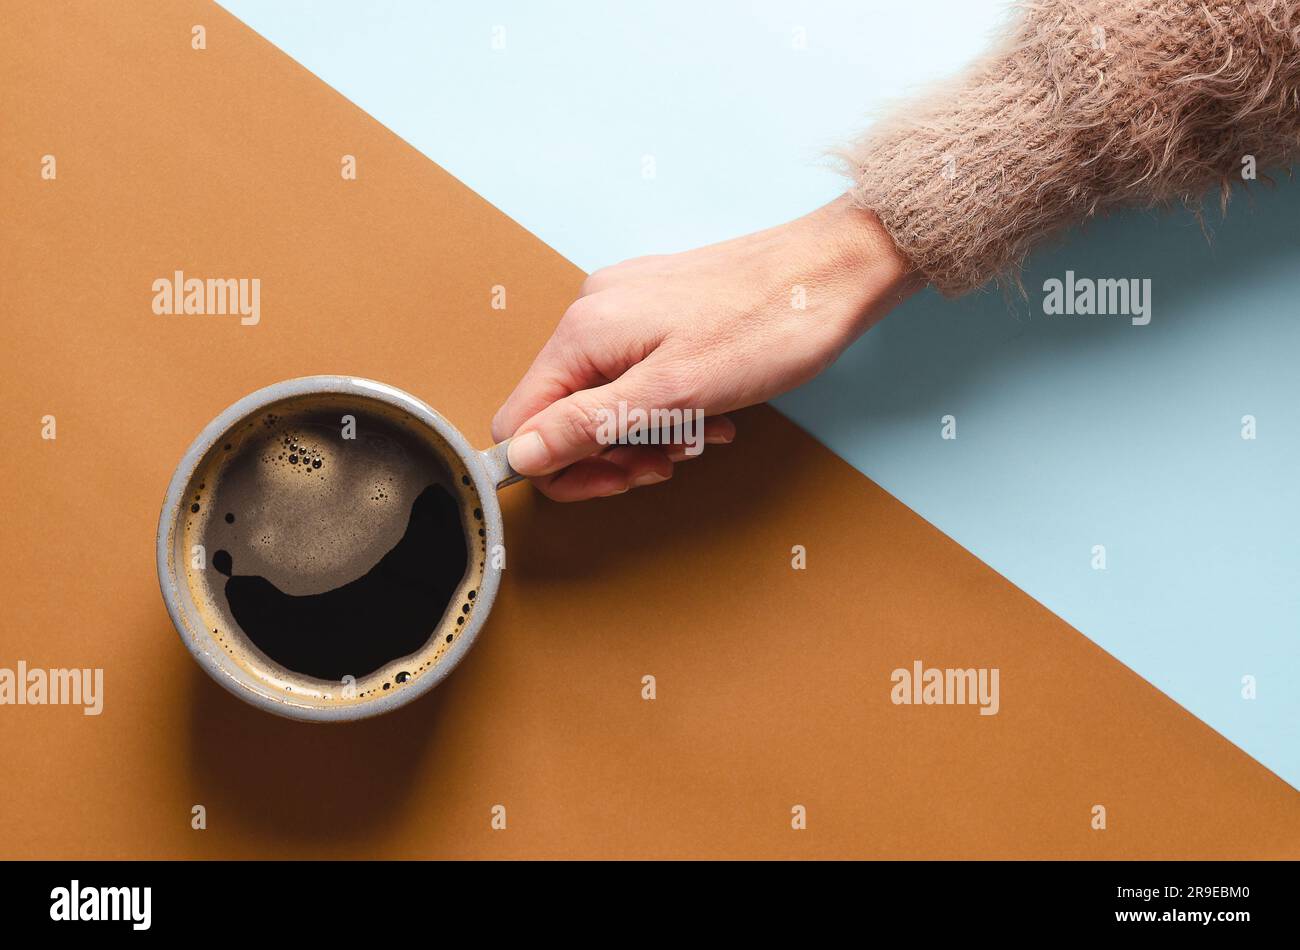 Female hand holding a cup of coffee on a blue and brown background. Stock Photo